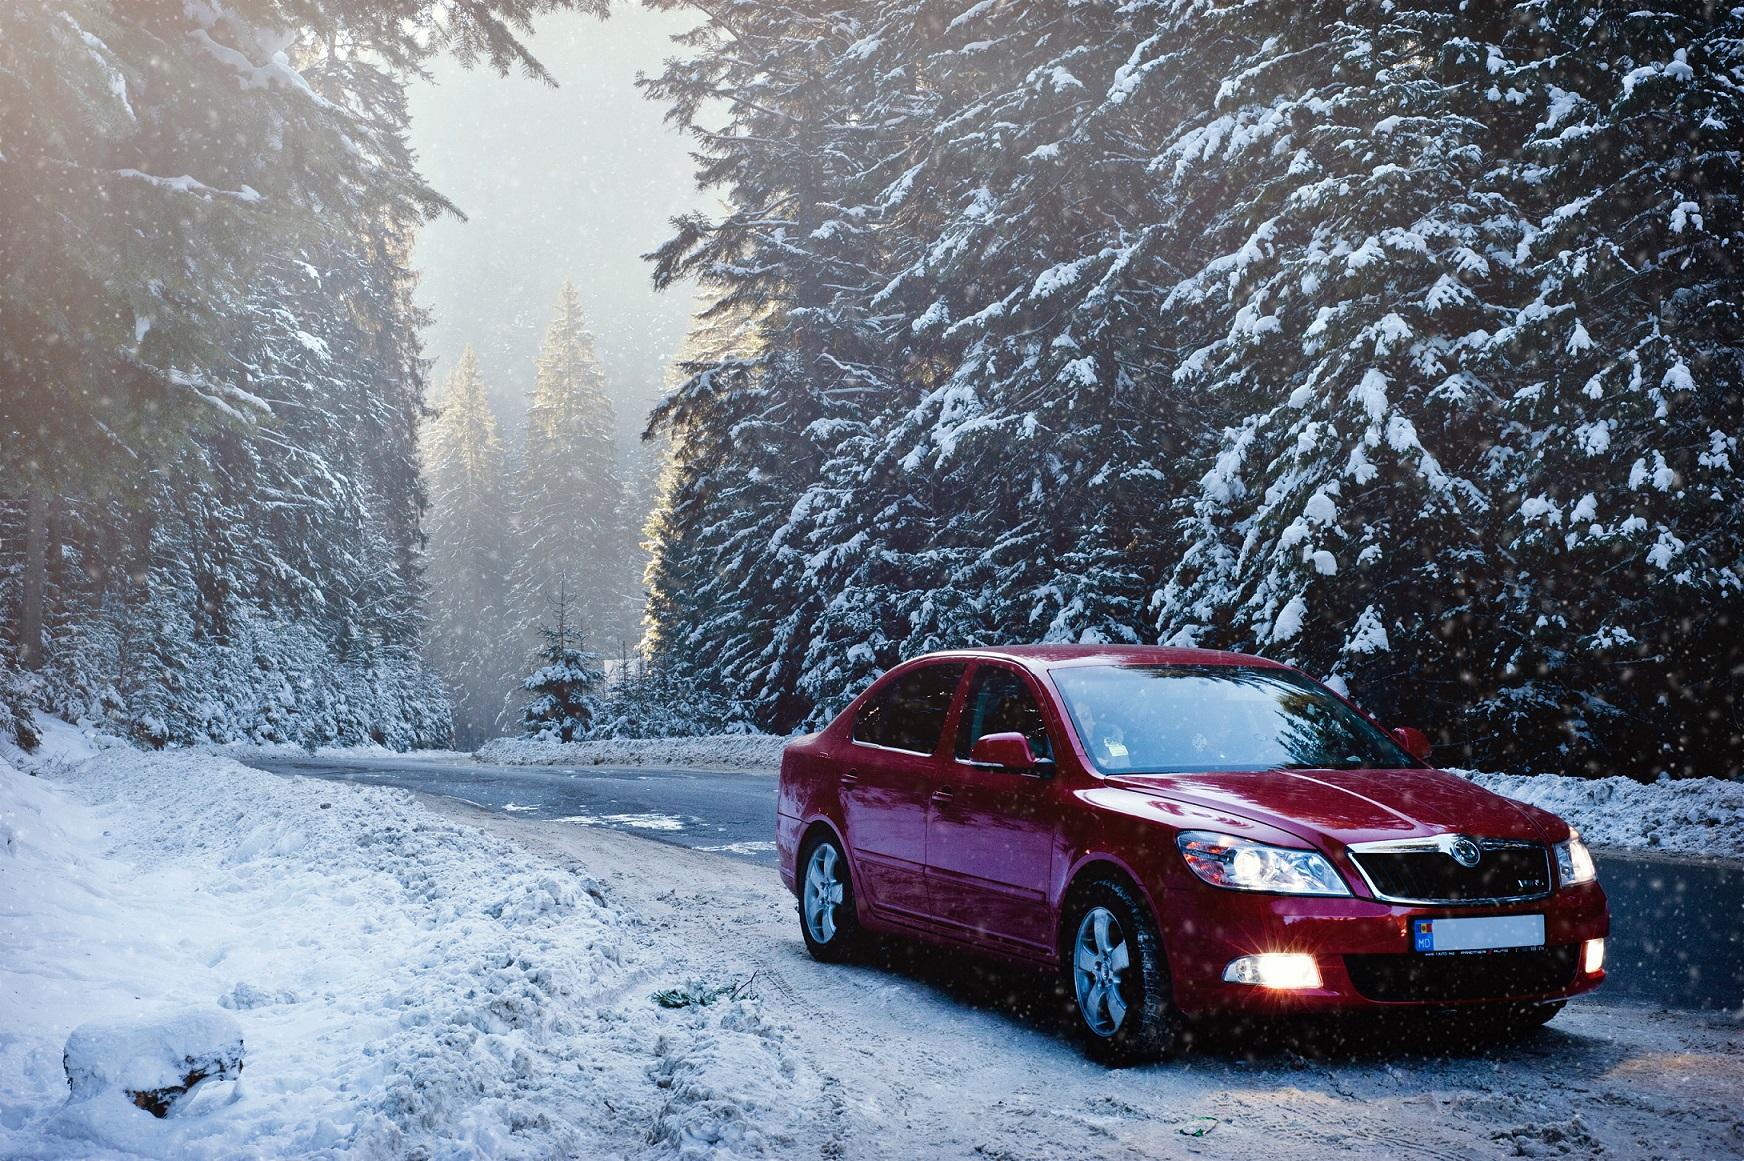 car_in_snowy_forest